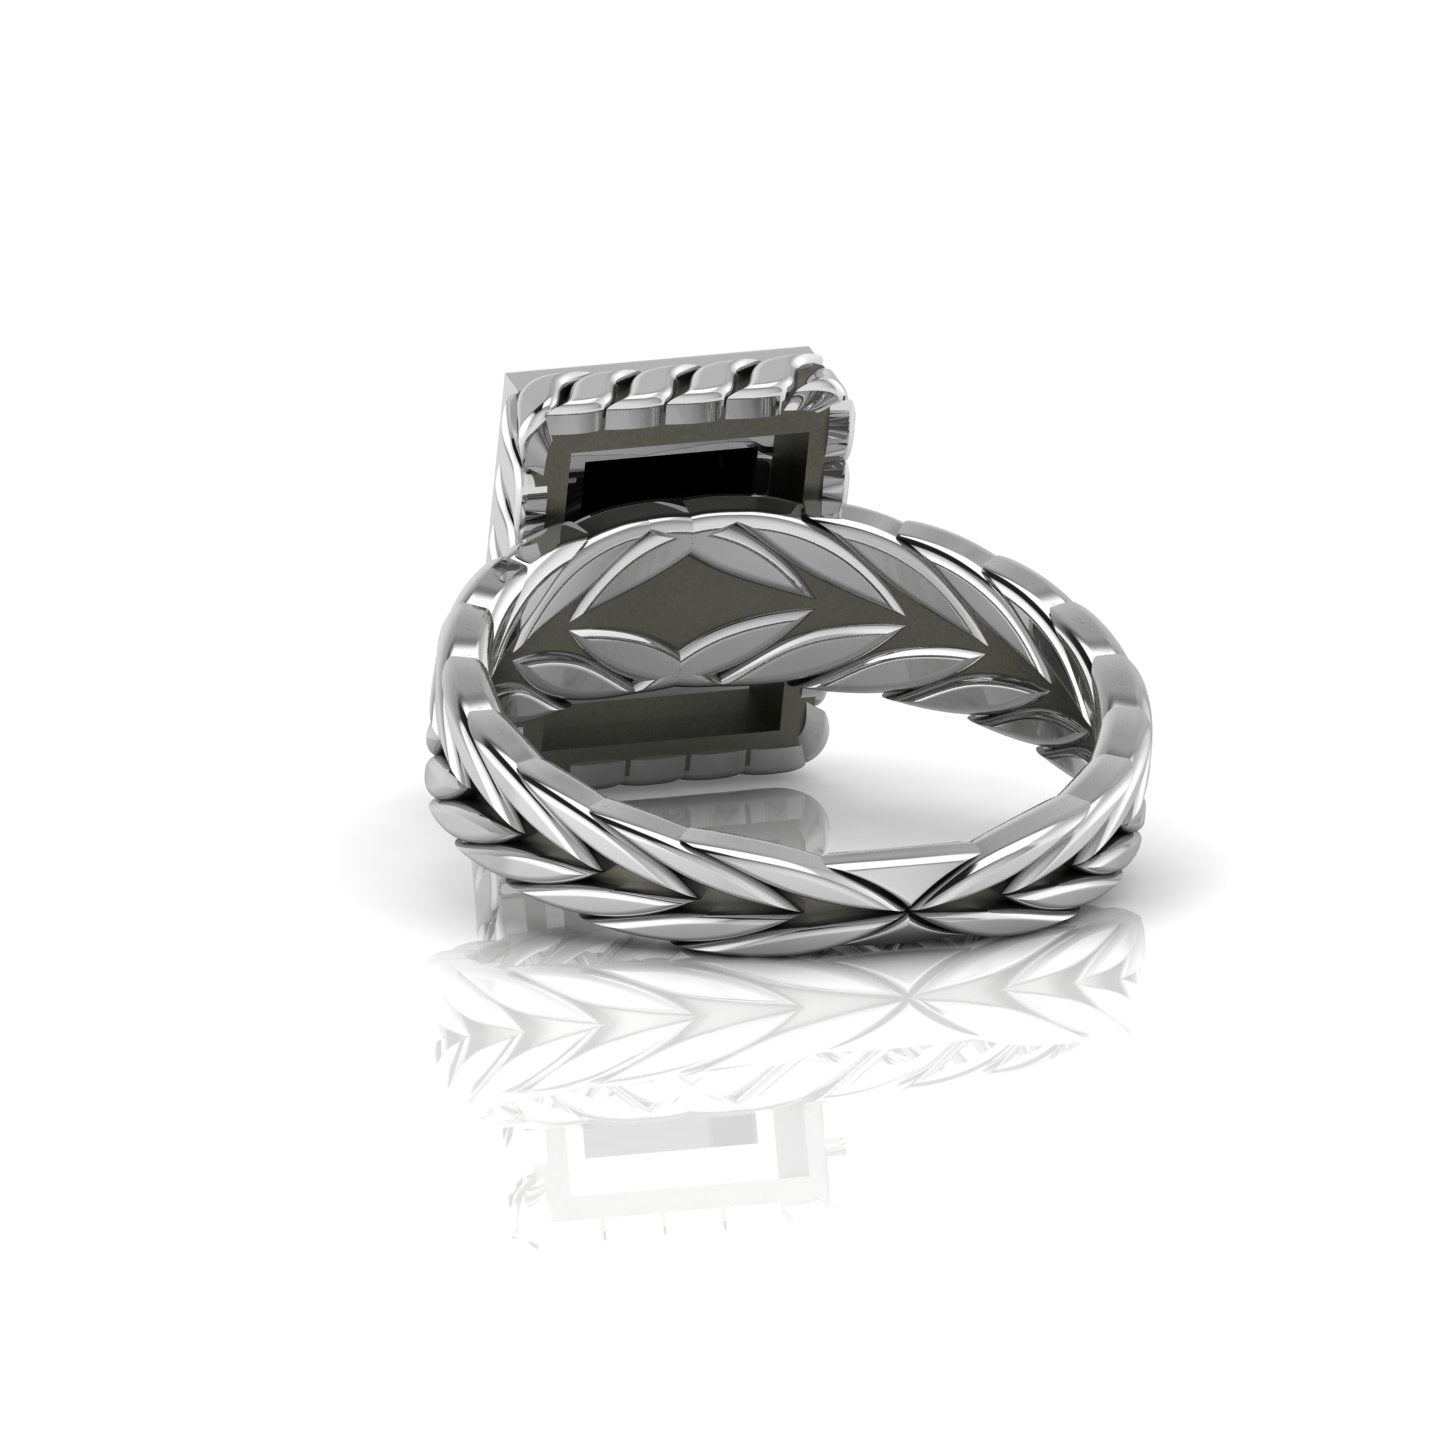 The Viper : The Powerful One, Natural Black Onyx Ring